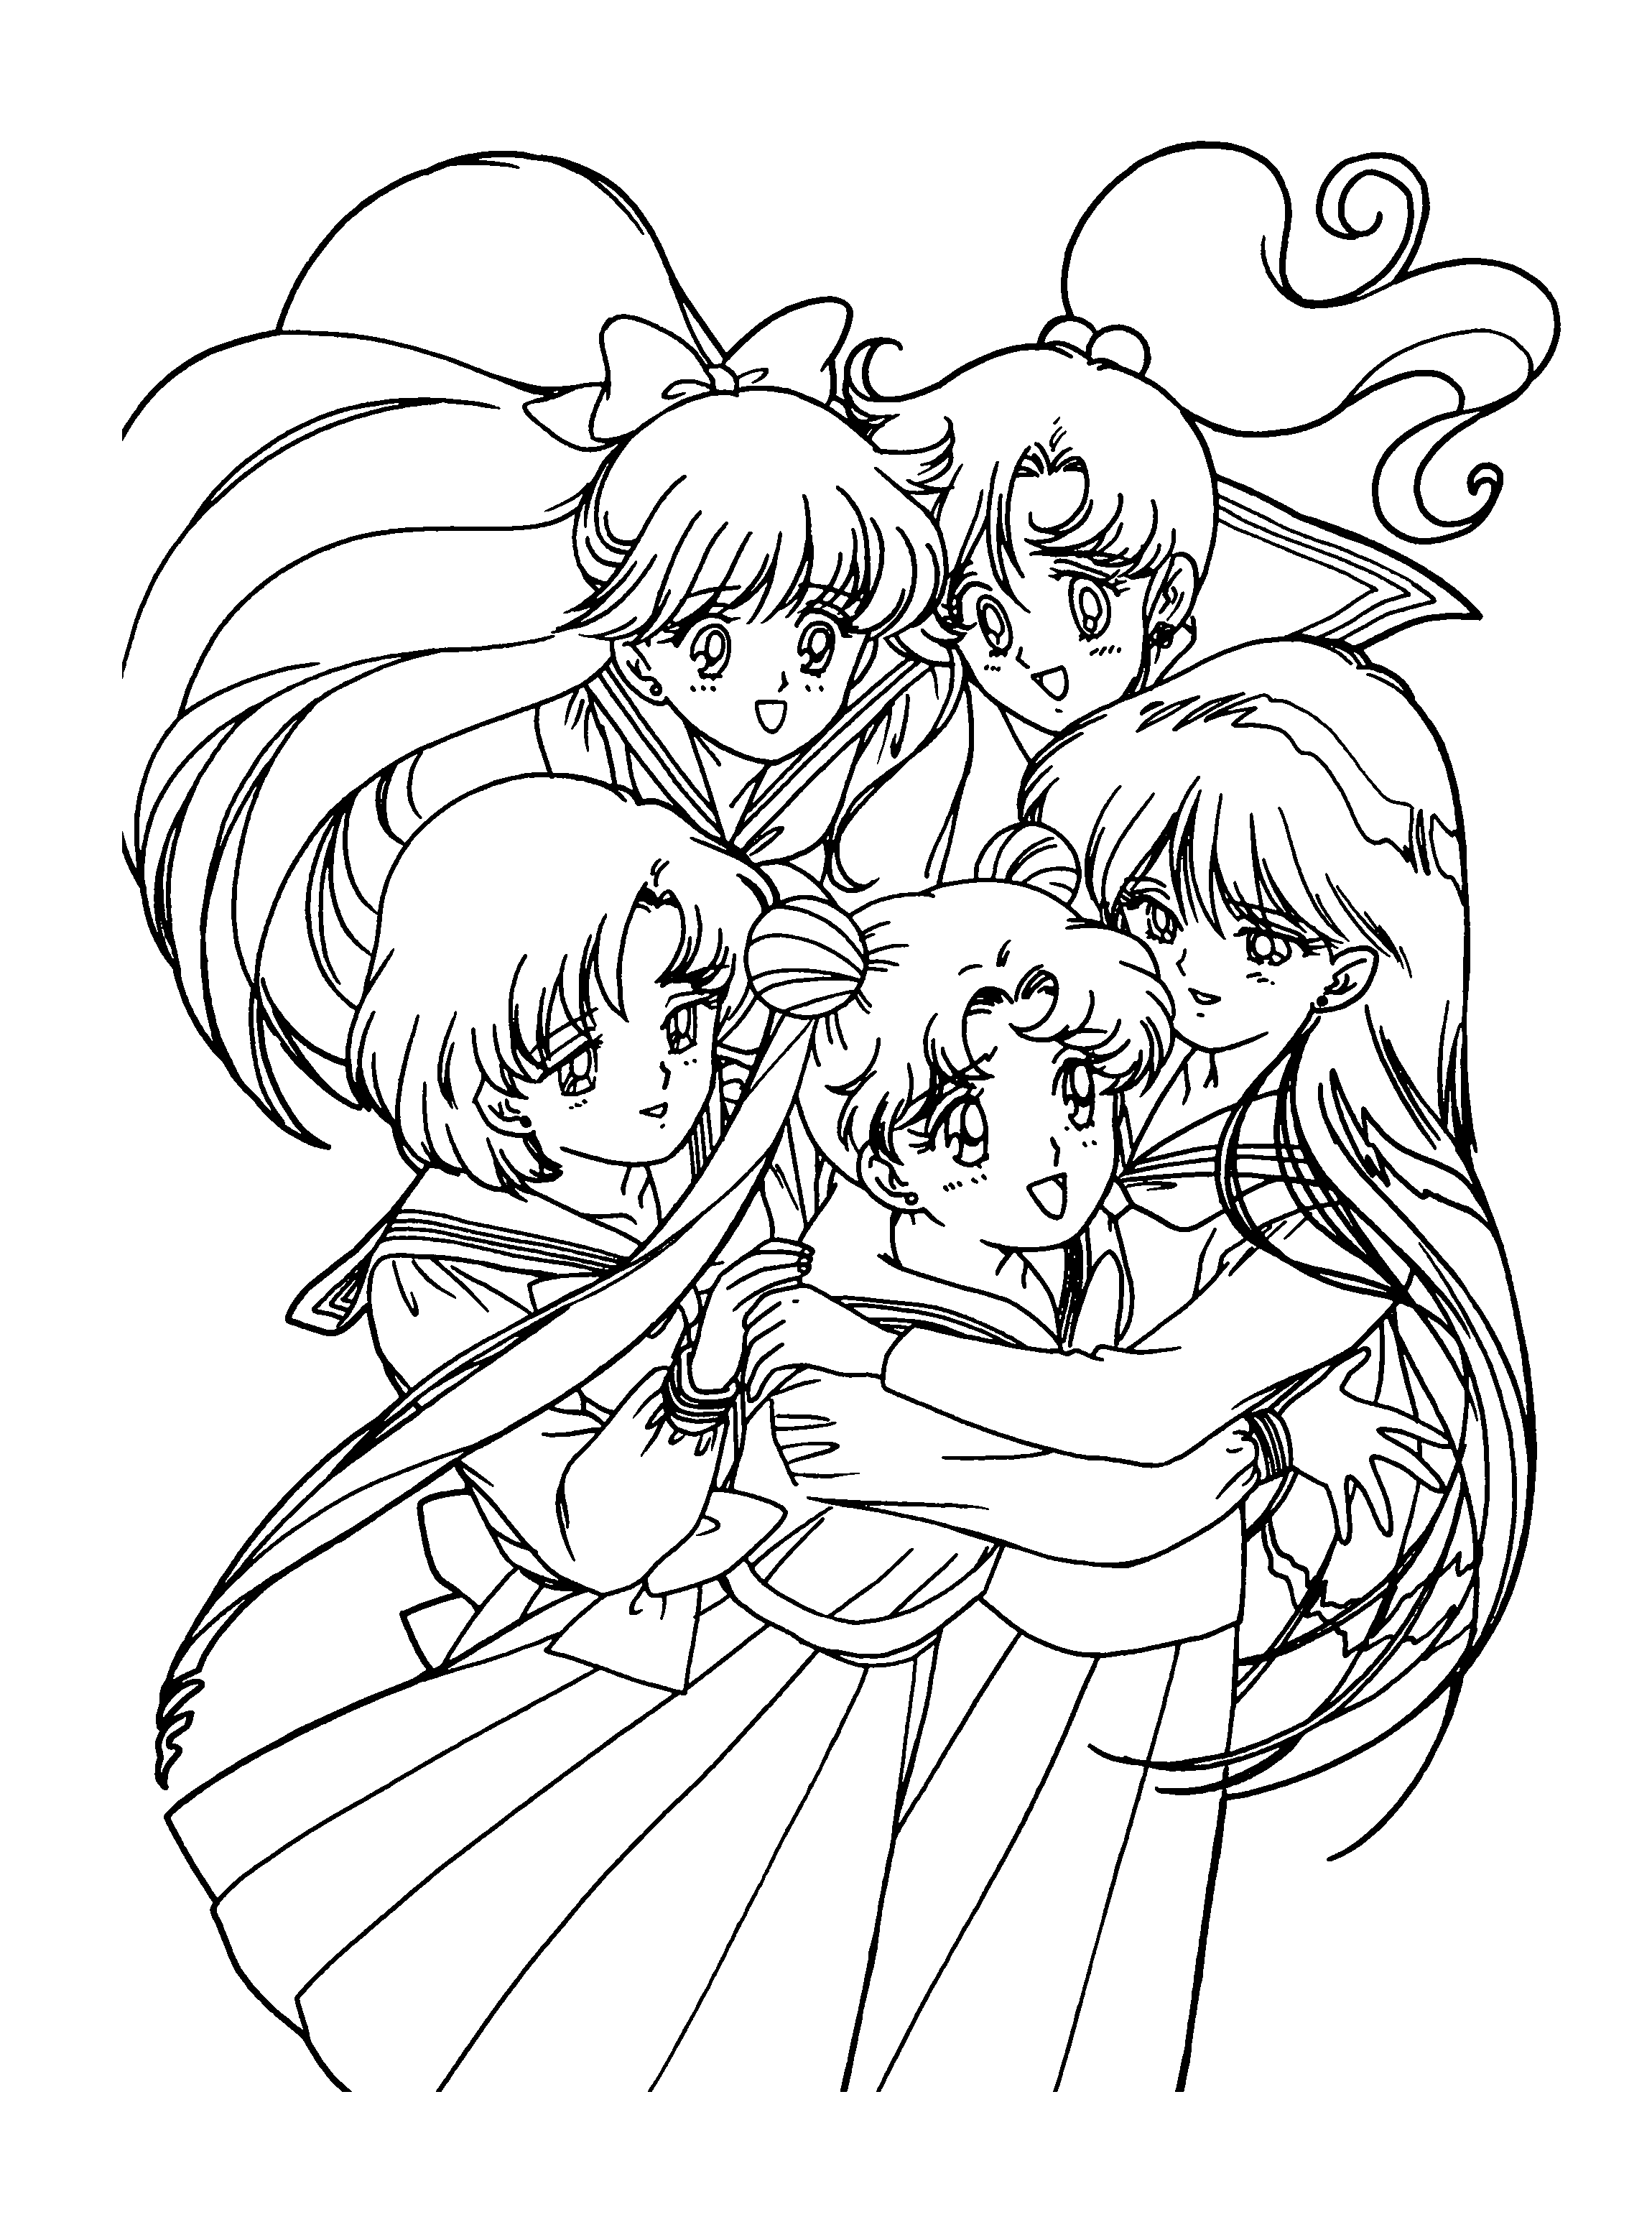 Coloring pages Tv series coloring pages Sailormoon